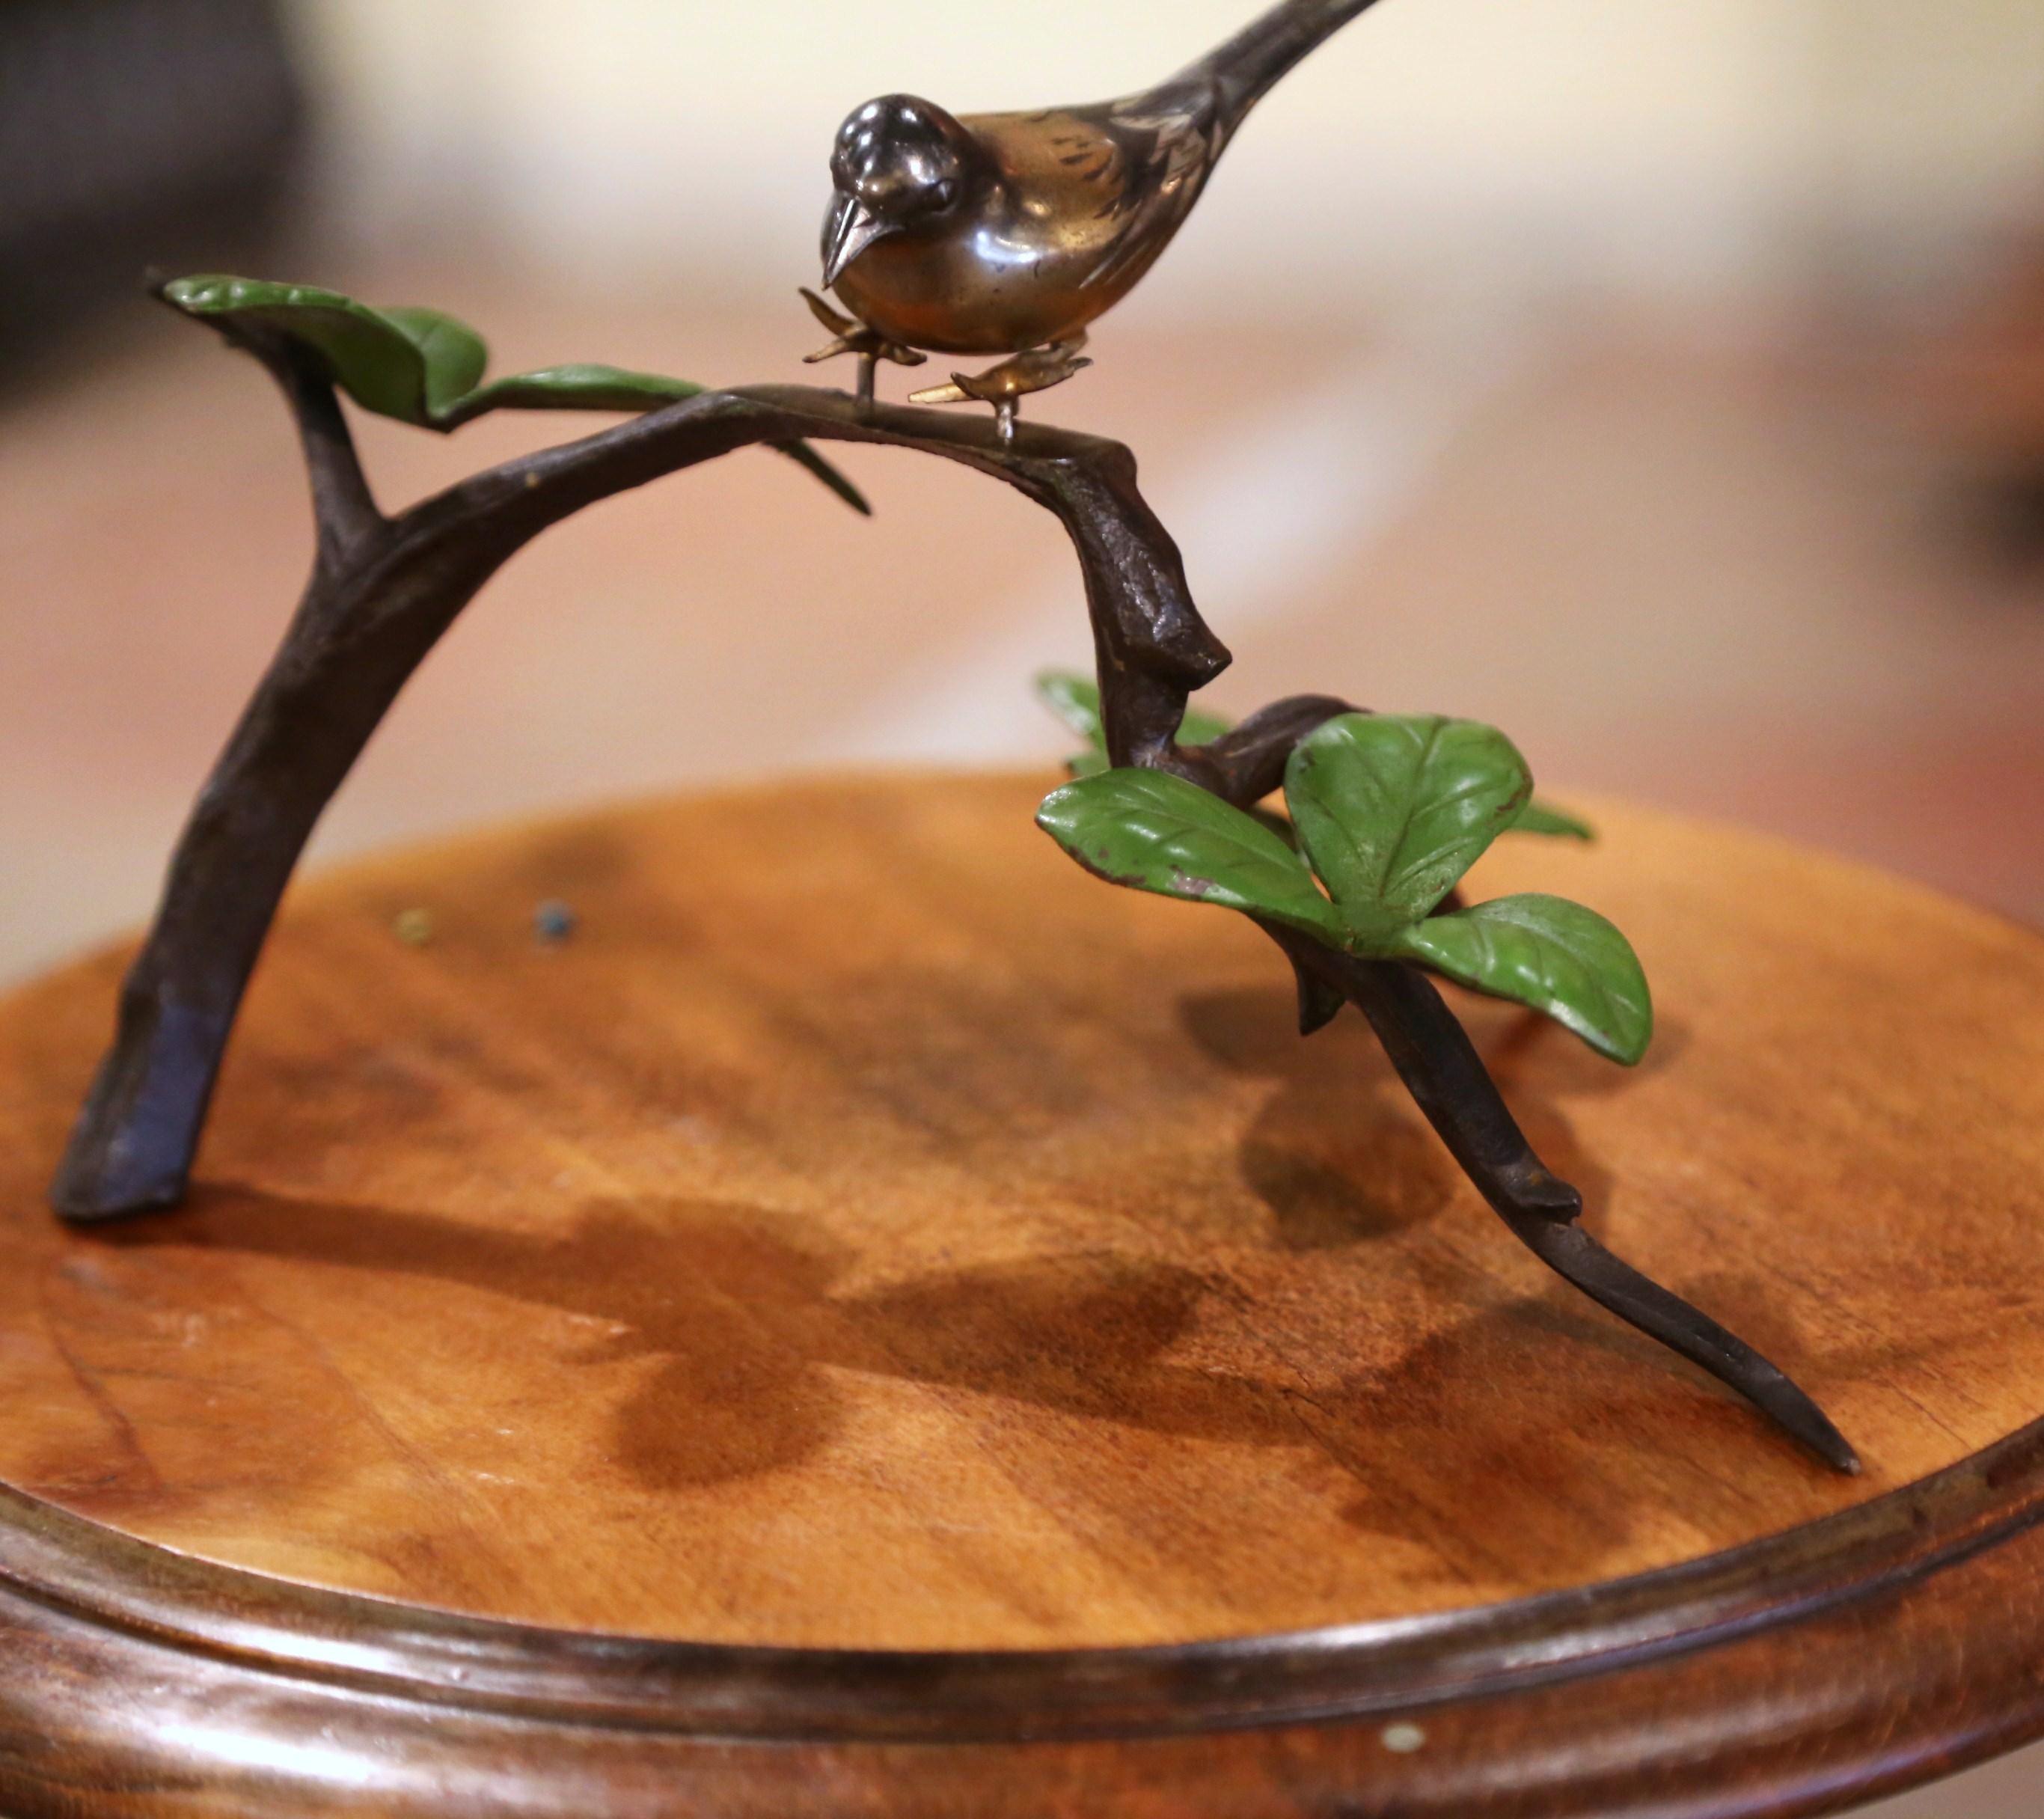 This antique intricate bird on tree branch figure was created in France circa 1930.  The bronze sculpture features three leaflets each painted green with intricate details of the leaf veins. The bird exhibits elegant, detailed characteristics and a